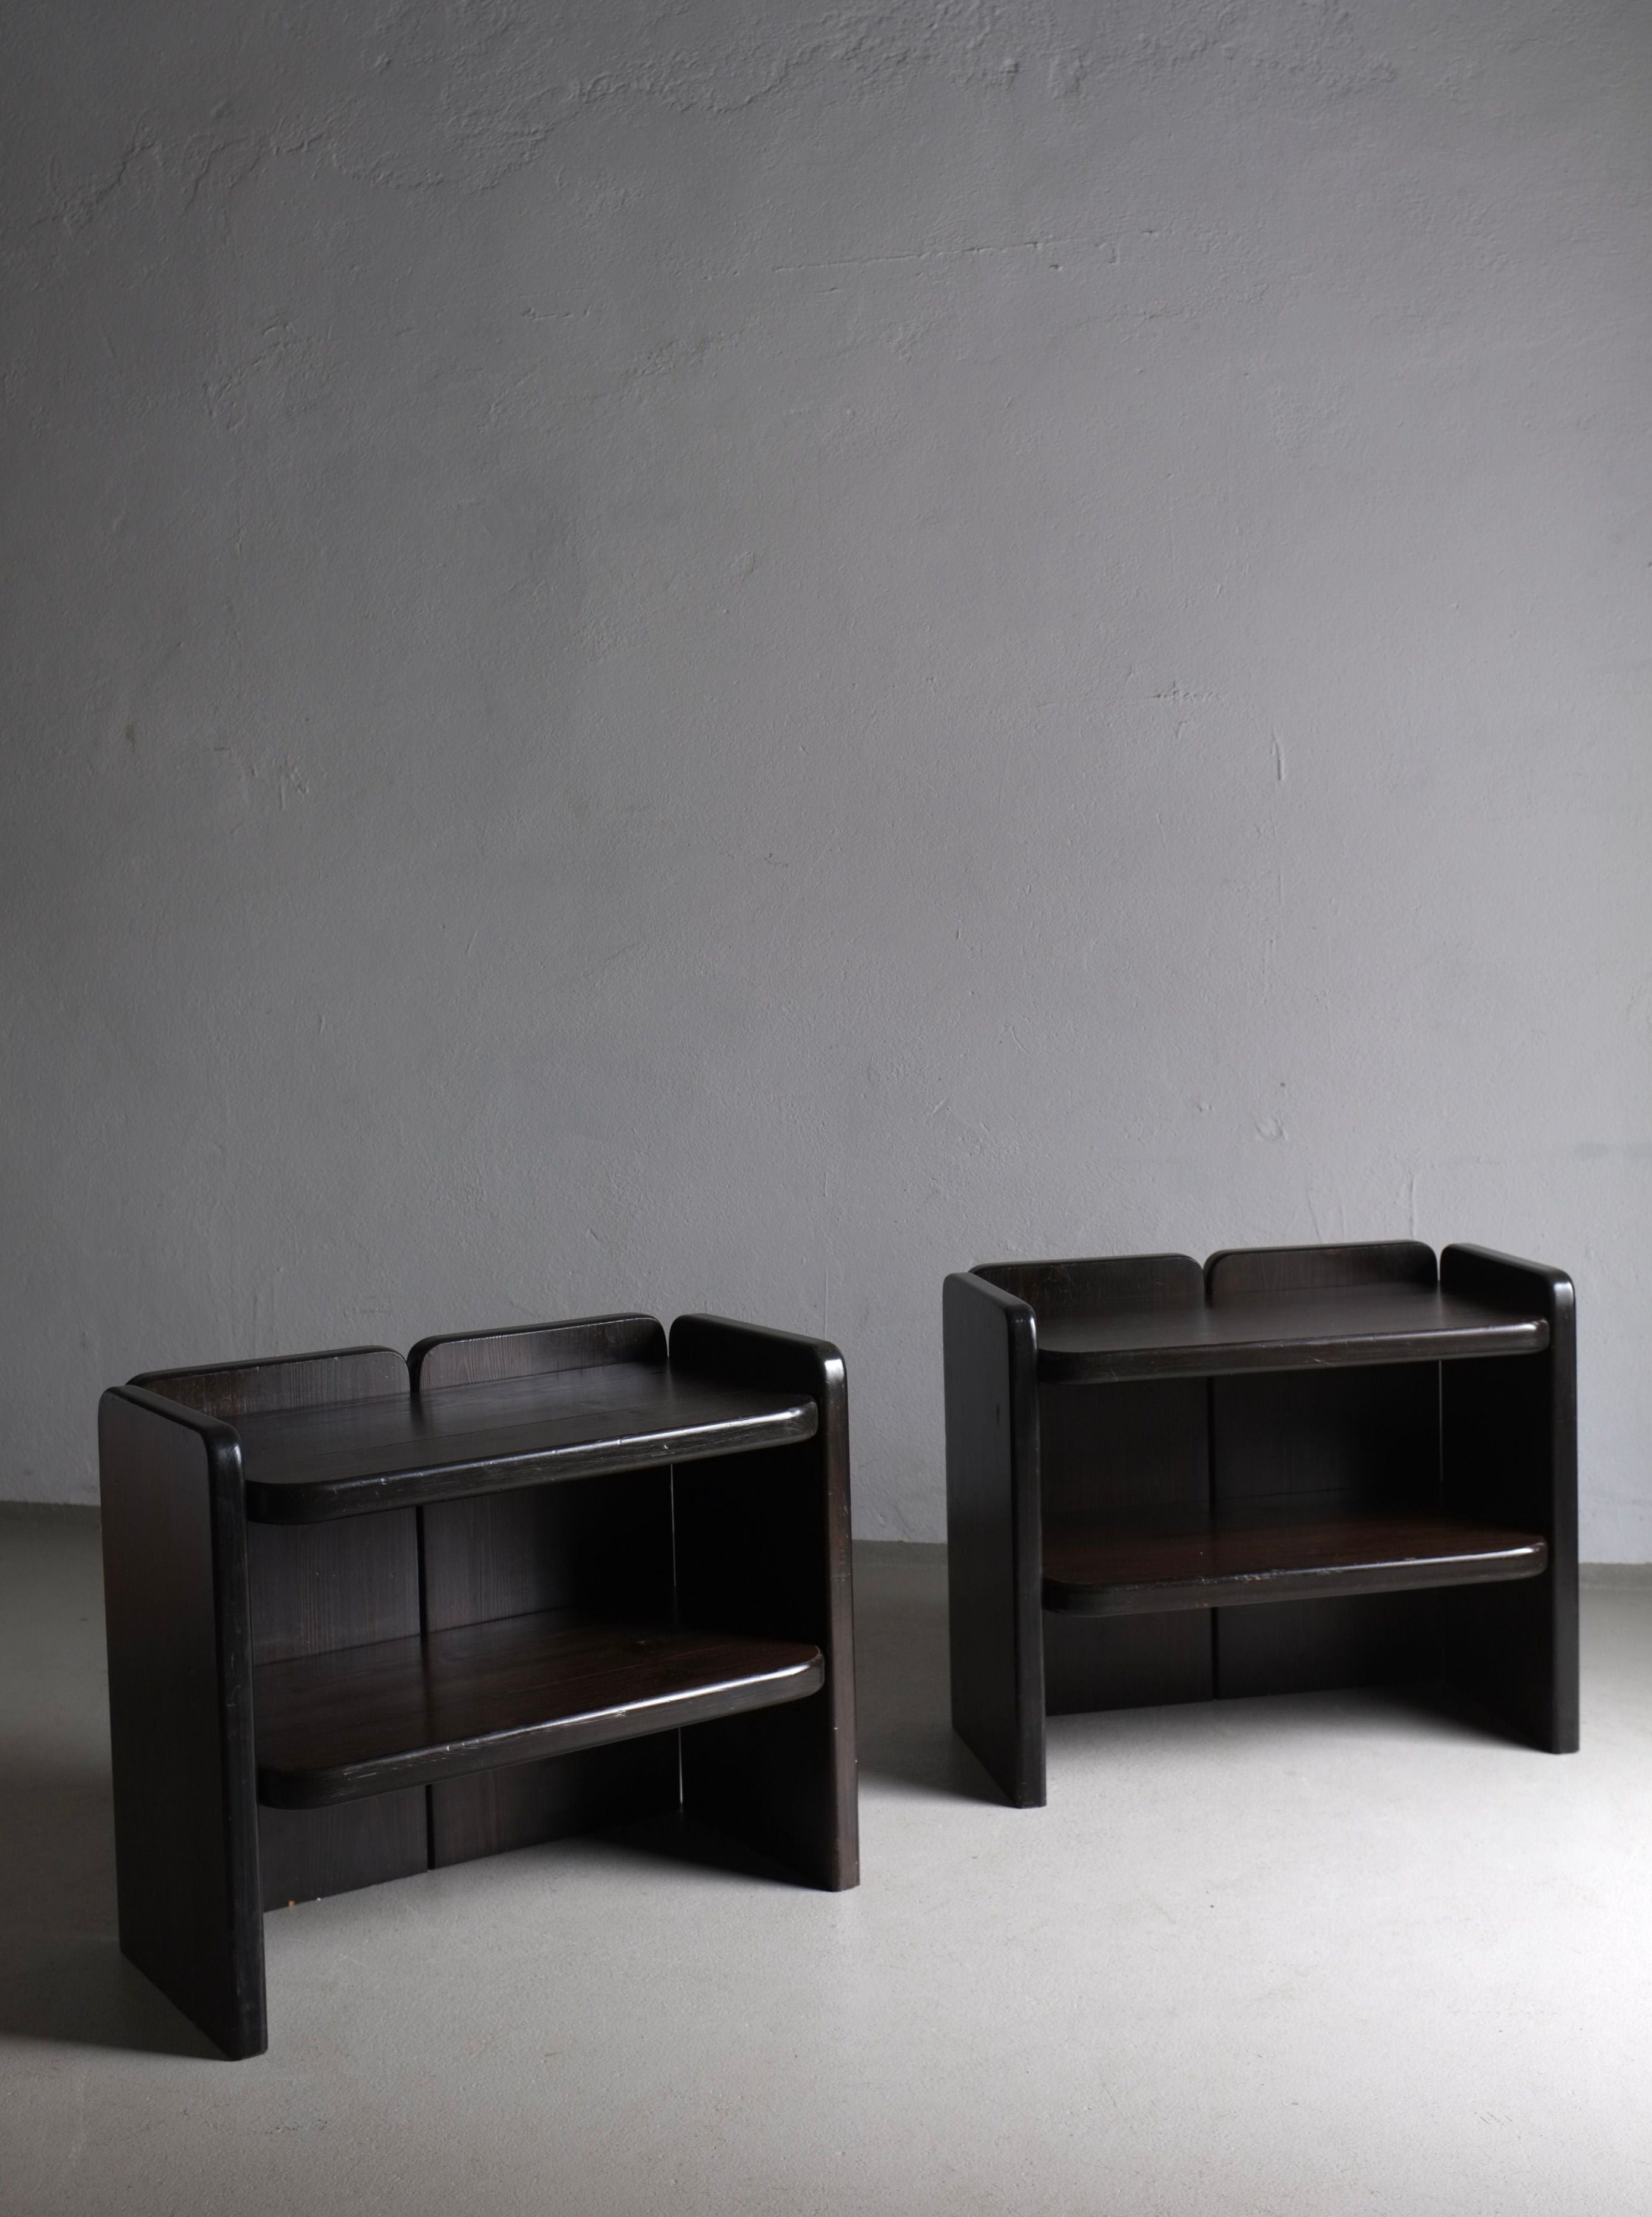 A minimalist composition featuring two identical *2 Brutalist Dark Wood Night Stands | 1970s* in vintage condition from *Veter Vintage*, with rounded corners and two shelves each, set against a plain, light grey wall and concrete floor. The setting is simple, highlighting the clean lines and functional design of the furniture.